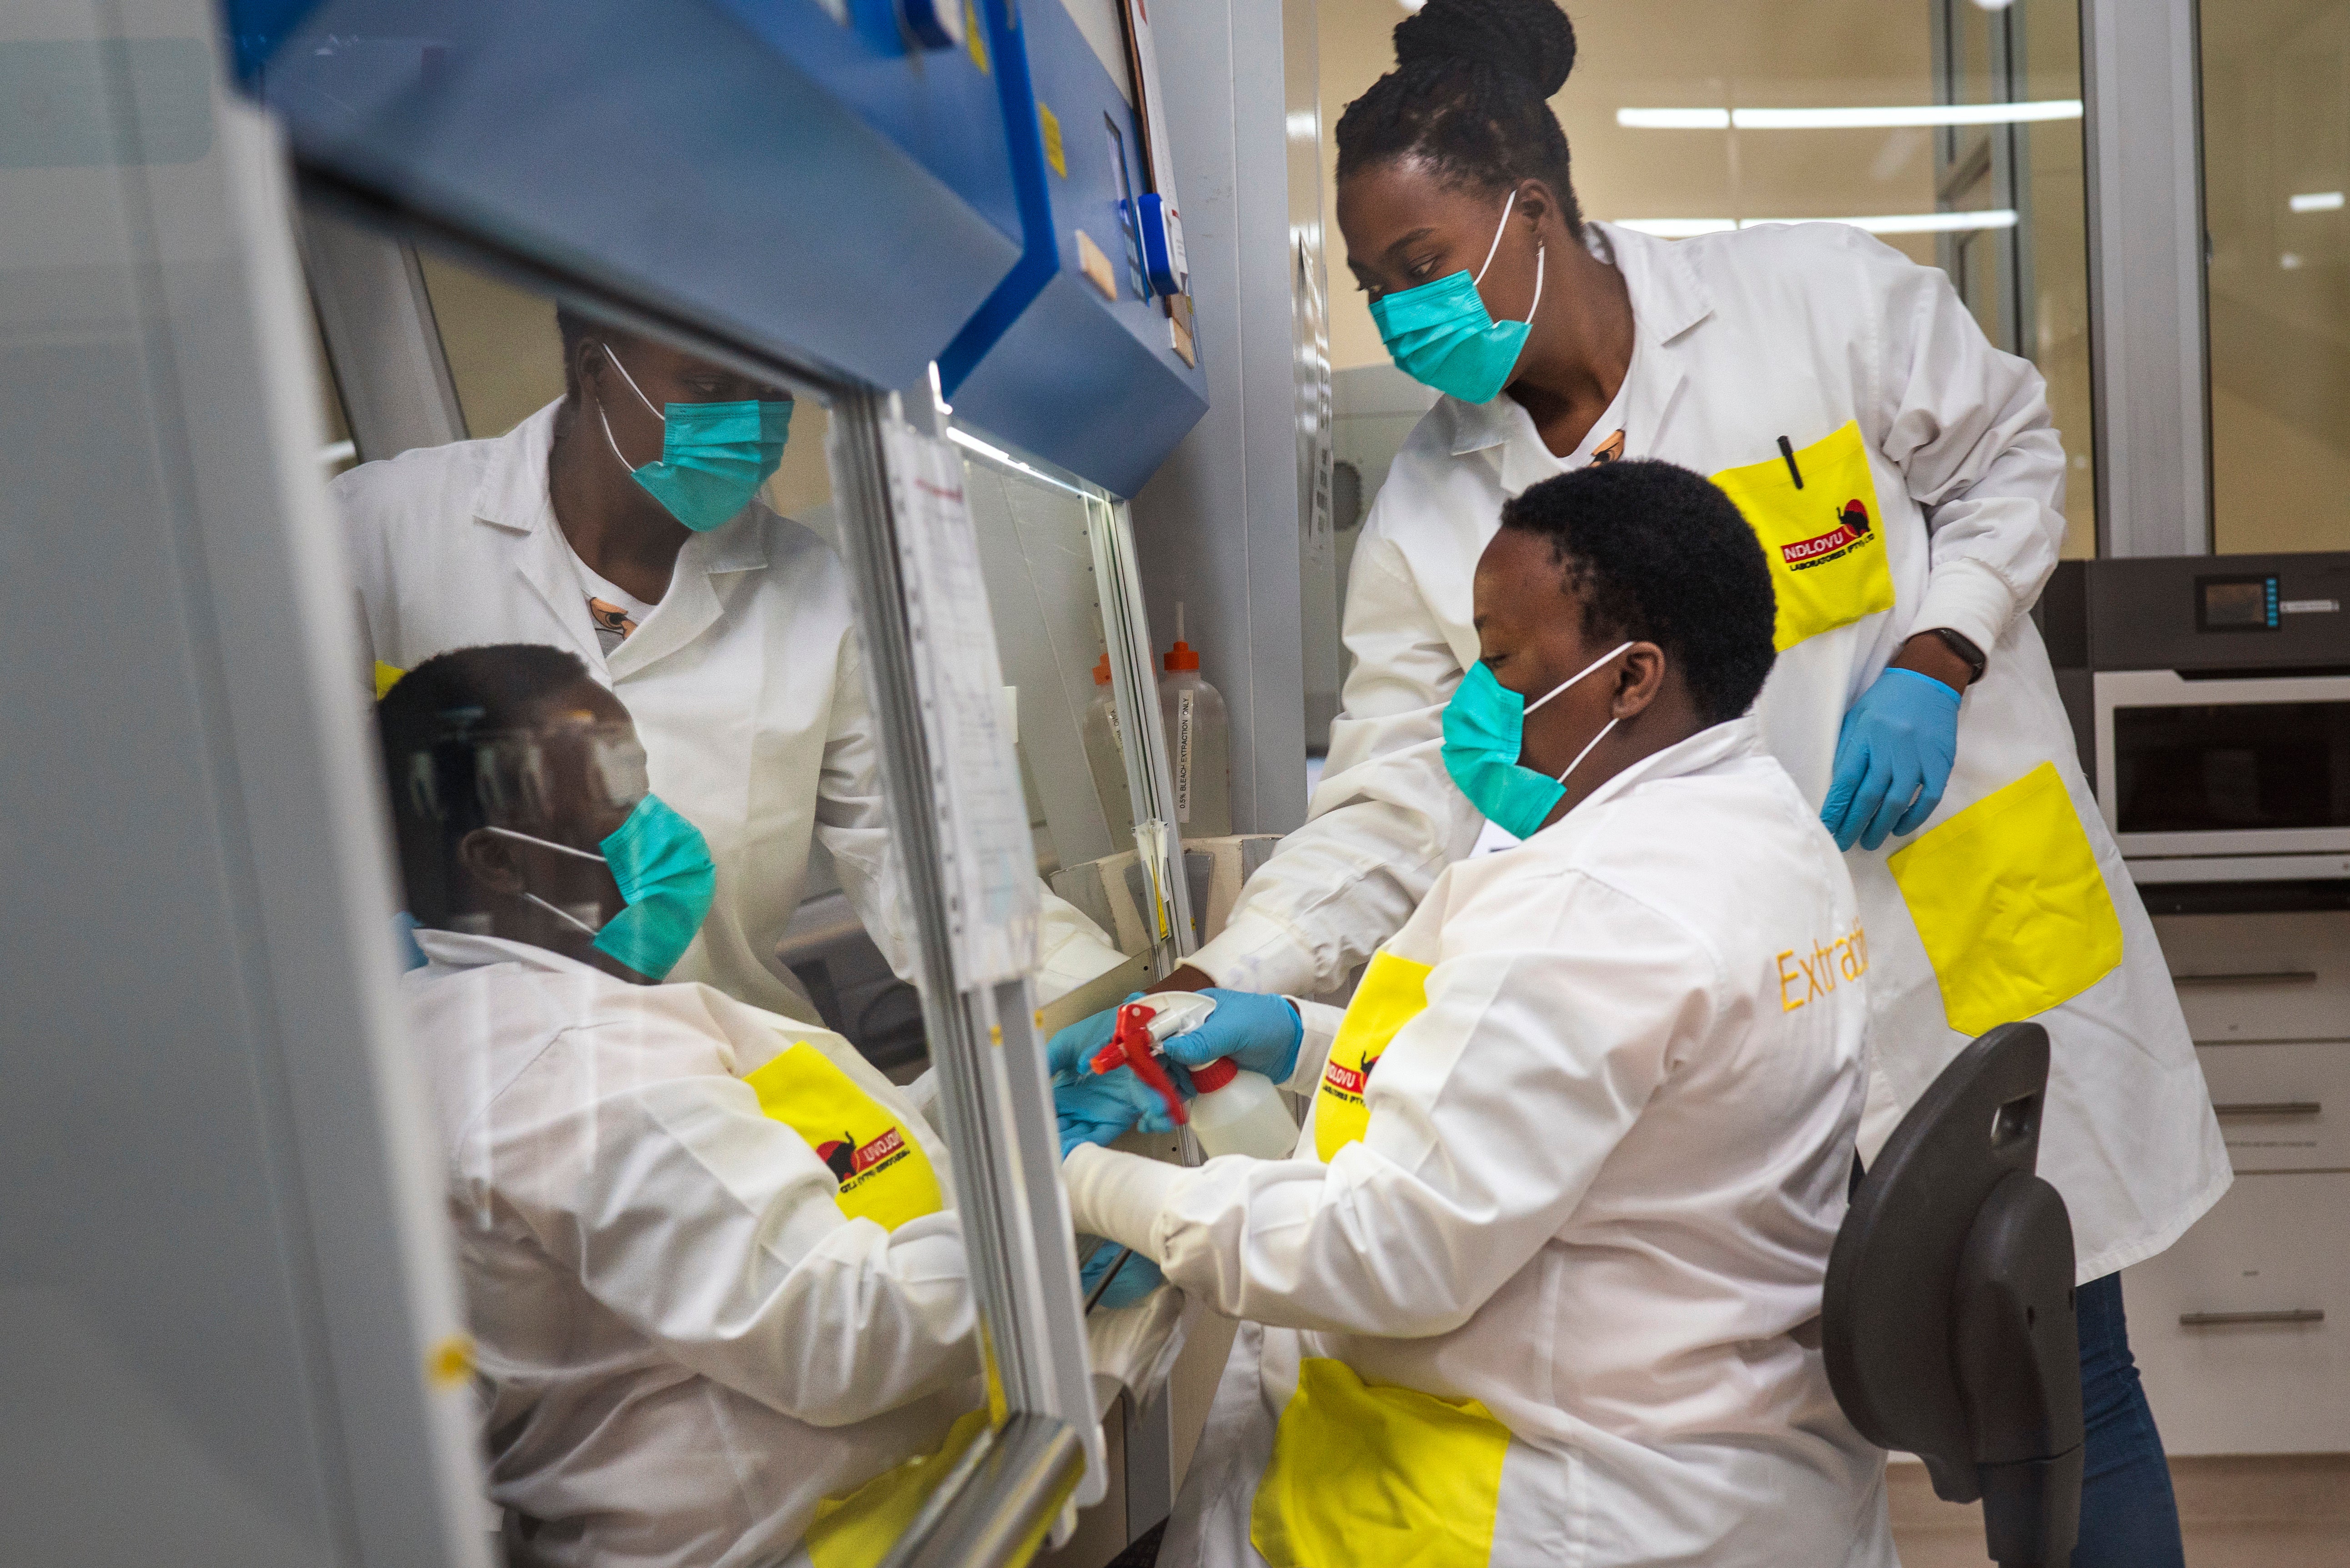 Medical scientists Melva Mlambo, right, and Puseletso Lesofi, preparing to sequence Covid omicron samples at the Ndlovu Research Center in South Africa